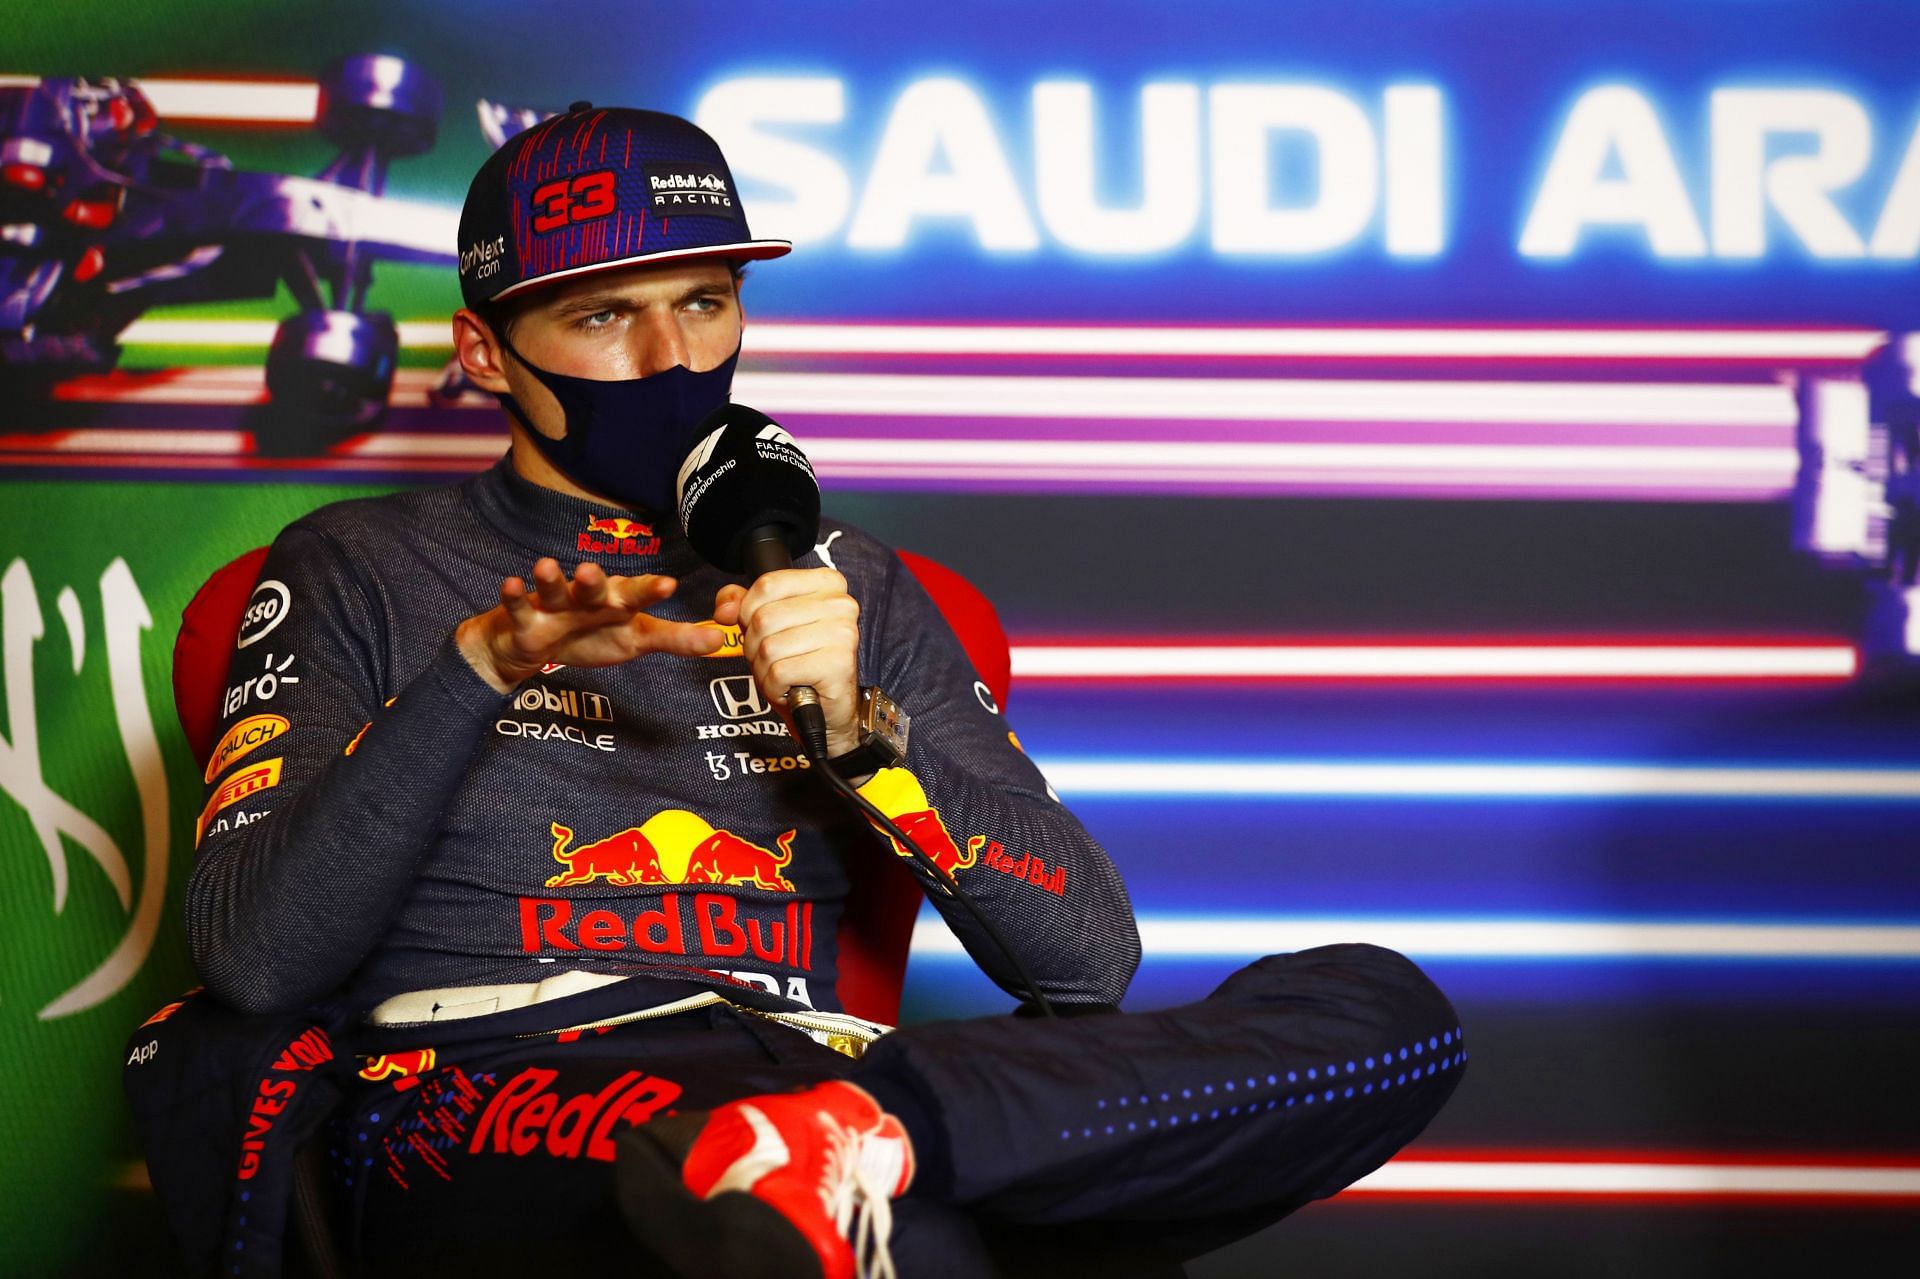 Max Verstappen talks in the press conference after the 2021 Saudi Arabian Grand Prix. (Photo by Sam Bloxham - Pool/Getty Images)